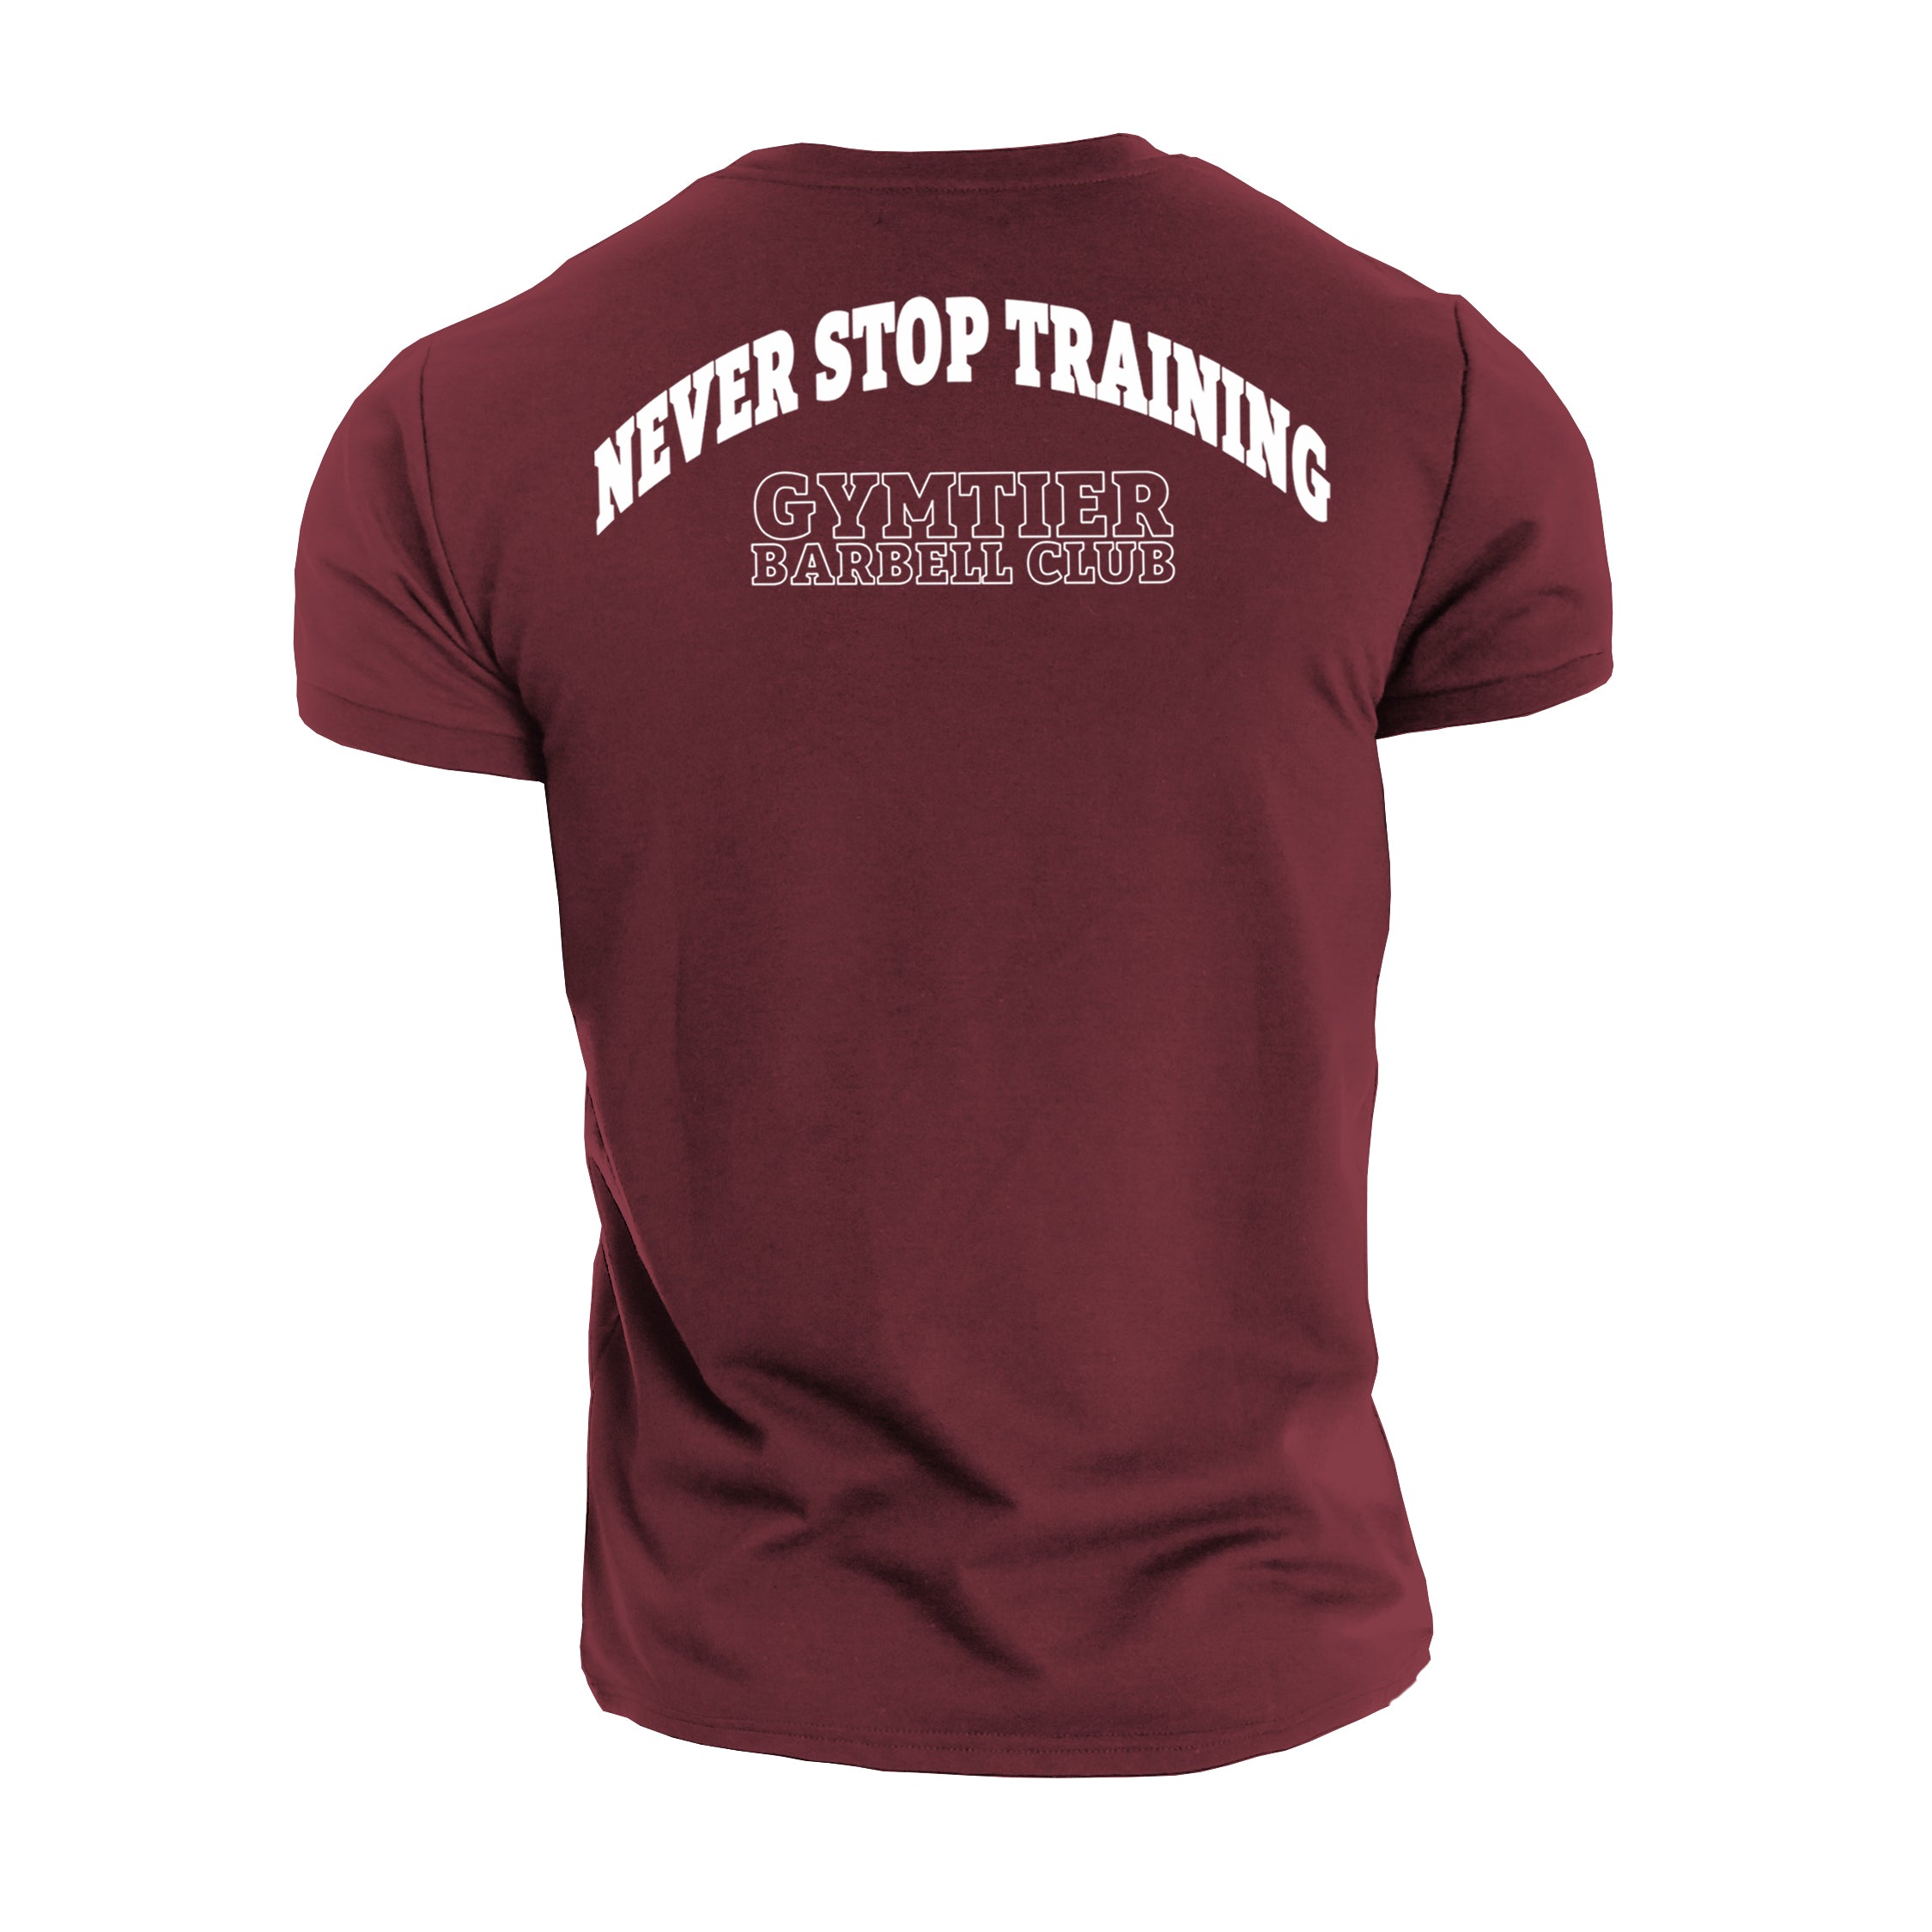 Gymtier Barbell Club - Never Stop Training - Gym T-Shirt